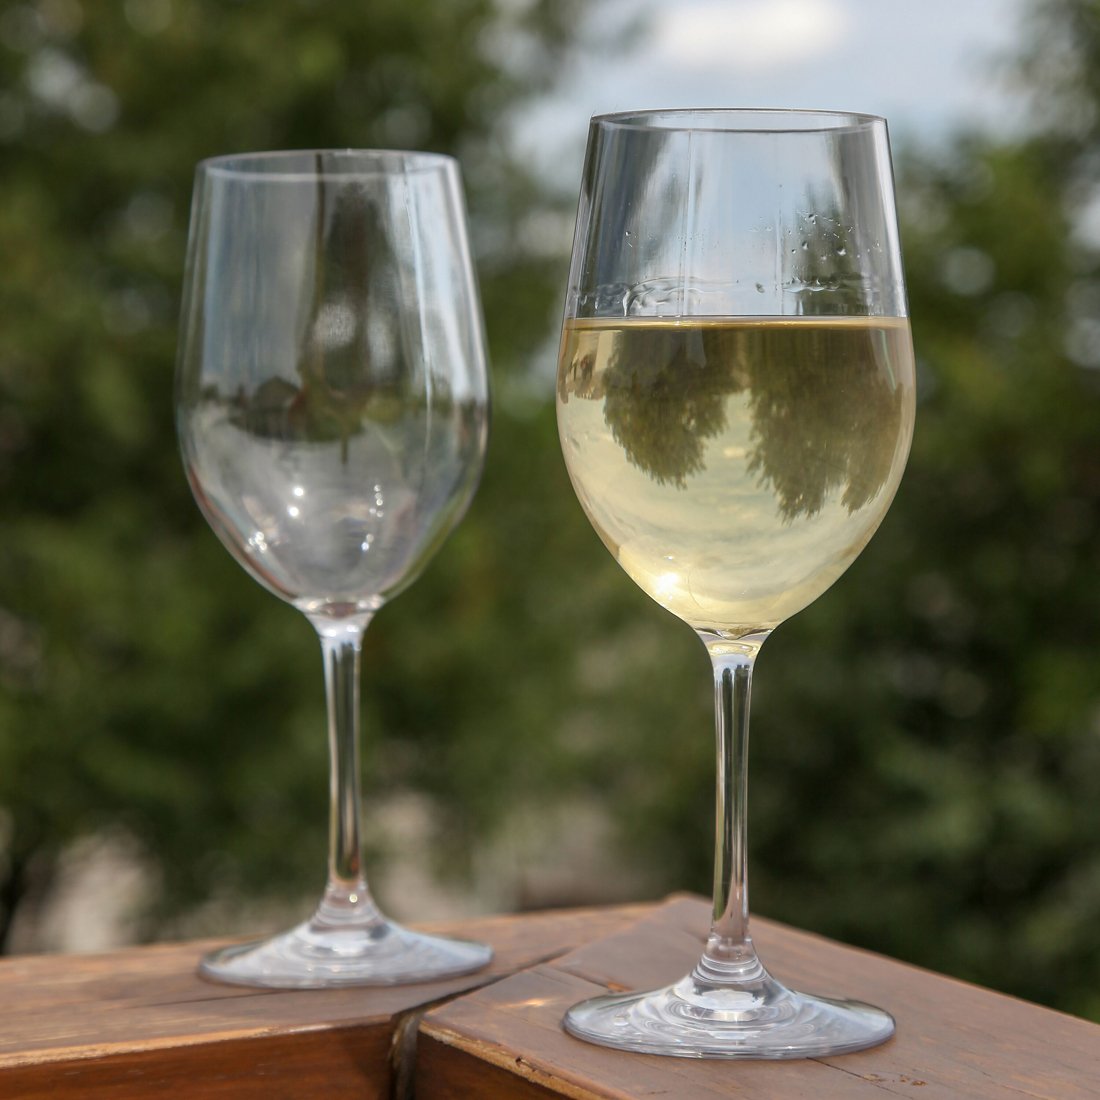 Lily's Home Unbreakable Chardonnay White Wine Glasses, Made of Shatterproof Tritan Plastic, For Indoor and Outdoor Use, Reusable and Dishwasher-Safe, Crystal Clear. 12 oz. Each, Set of 2